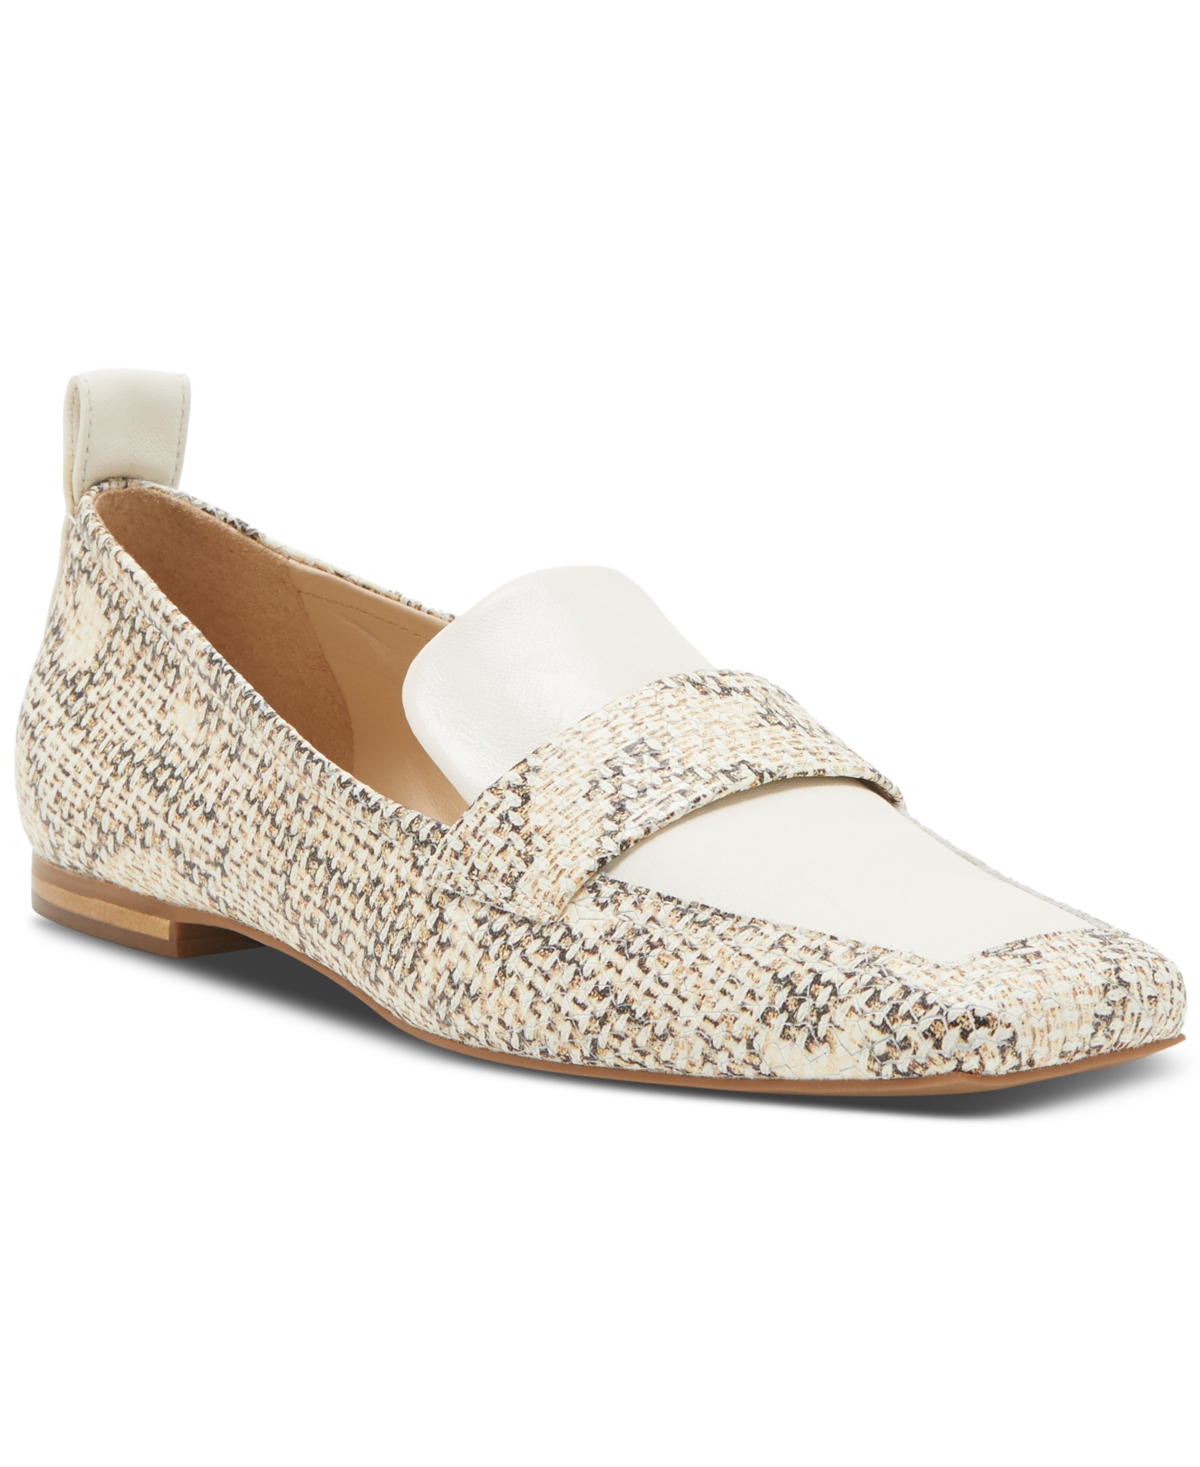 UPC 191707568969 product image for Vince Camuto Women's Emenlyn Loafer Flats Women's Shoes | upcitemdb.com